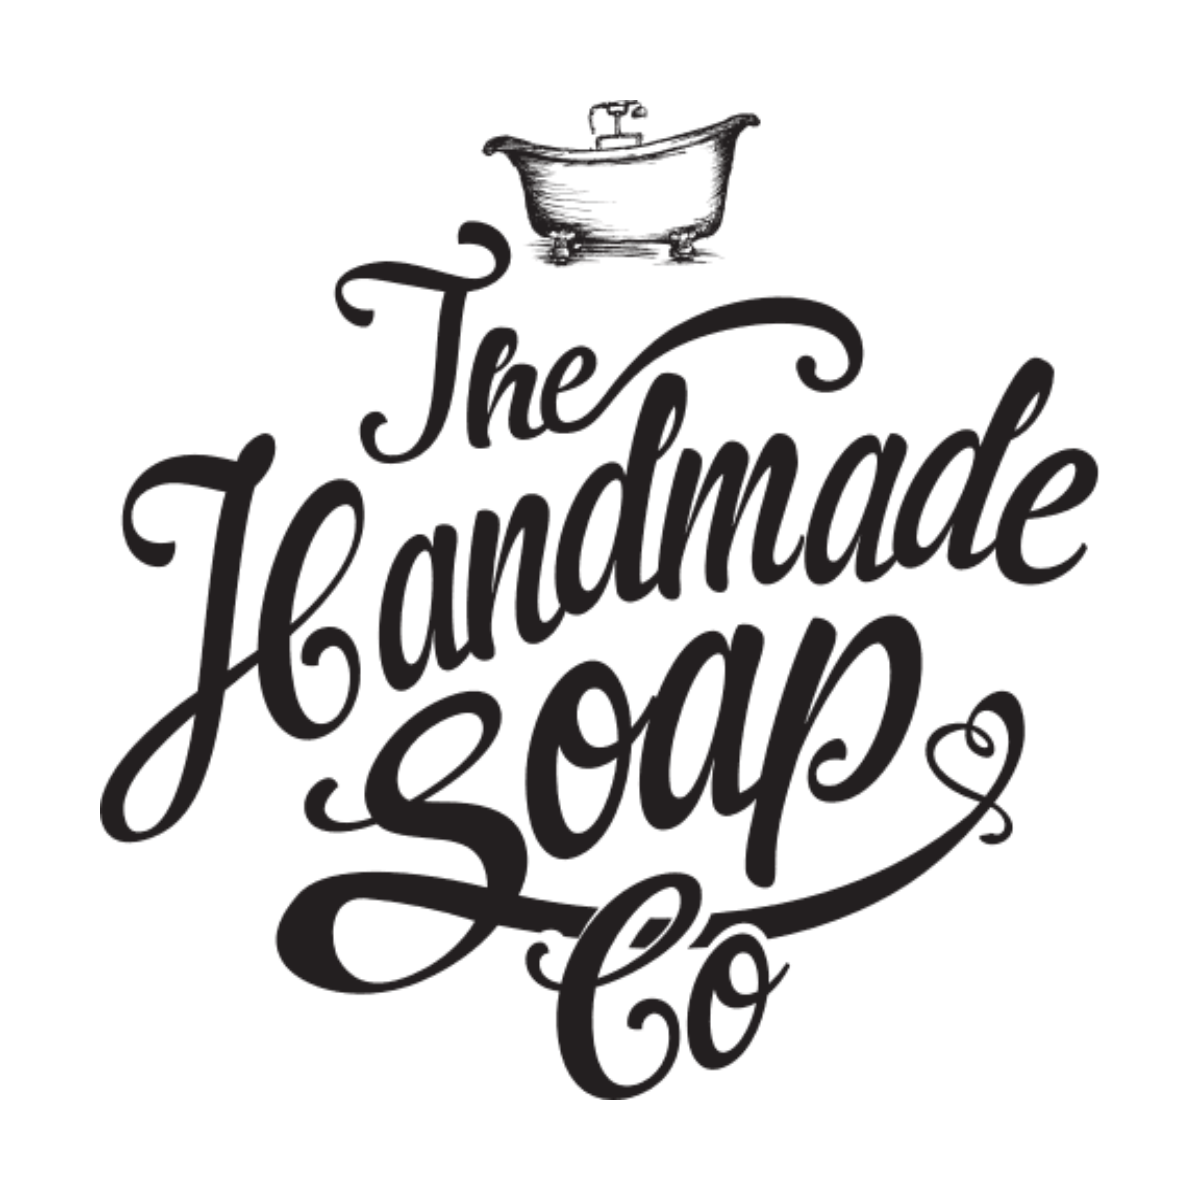 The Handmade Soap Company coupon codes, promo codes and deals